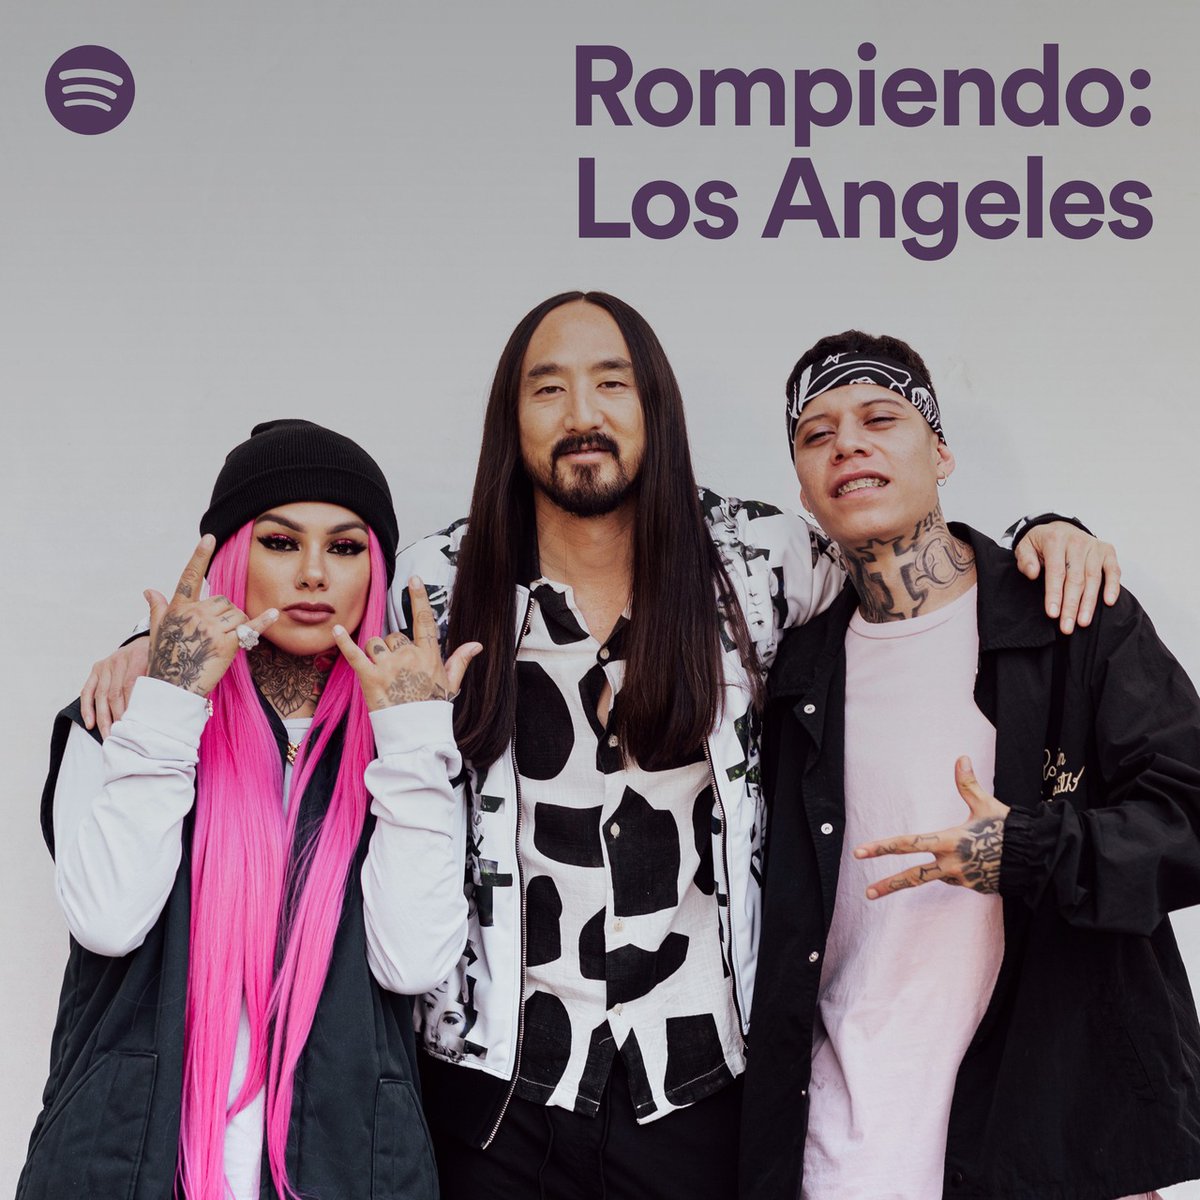 Ultimate on Rompiendo: Los Angeles 🔥 @Spotify @VivaLatino @SnowThaProduct @santa_fe_klan_ go check it out here🙌 open.spotify.com/playlist/37i9d…